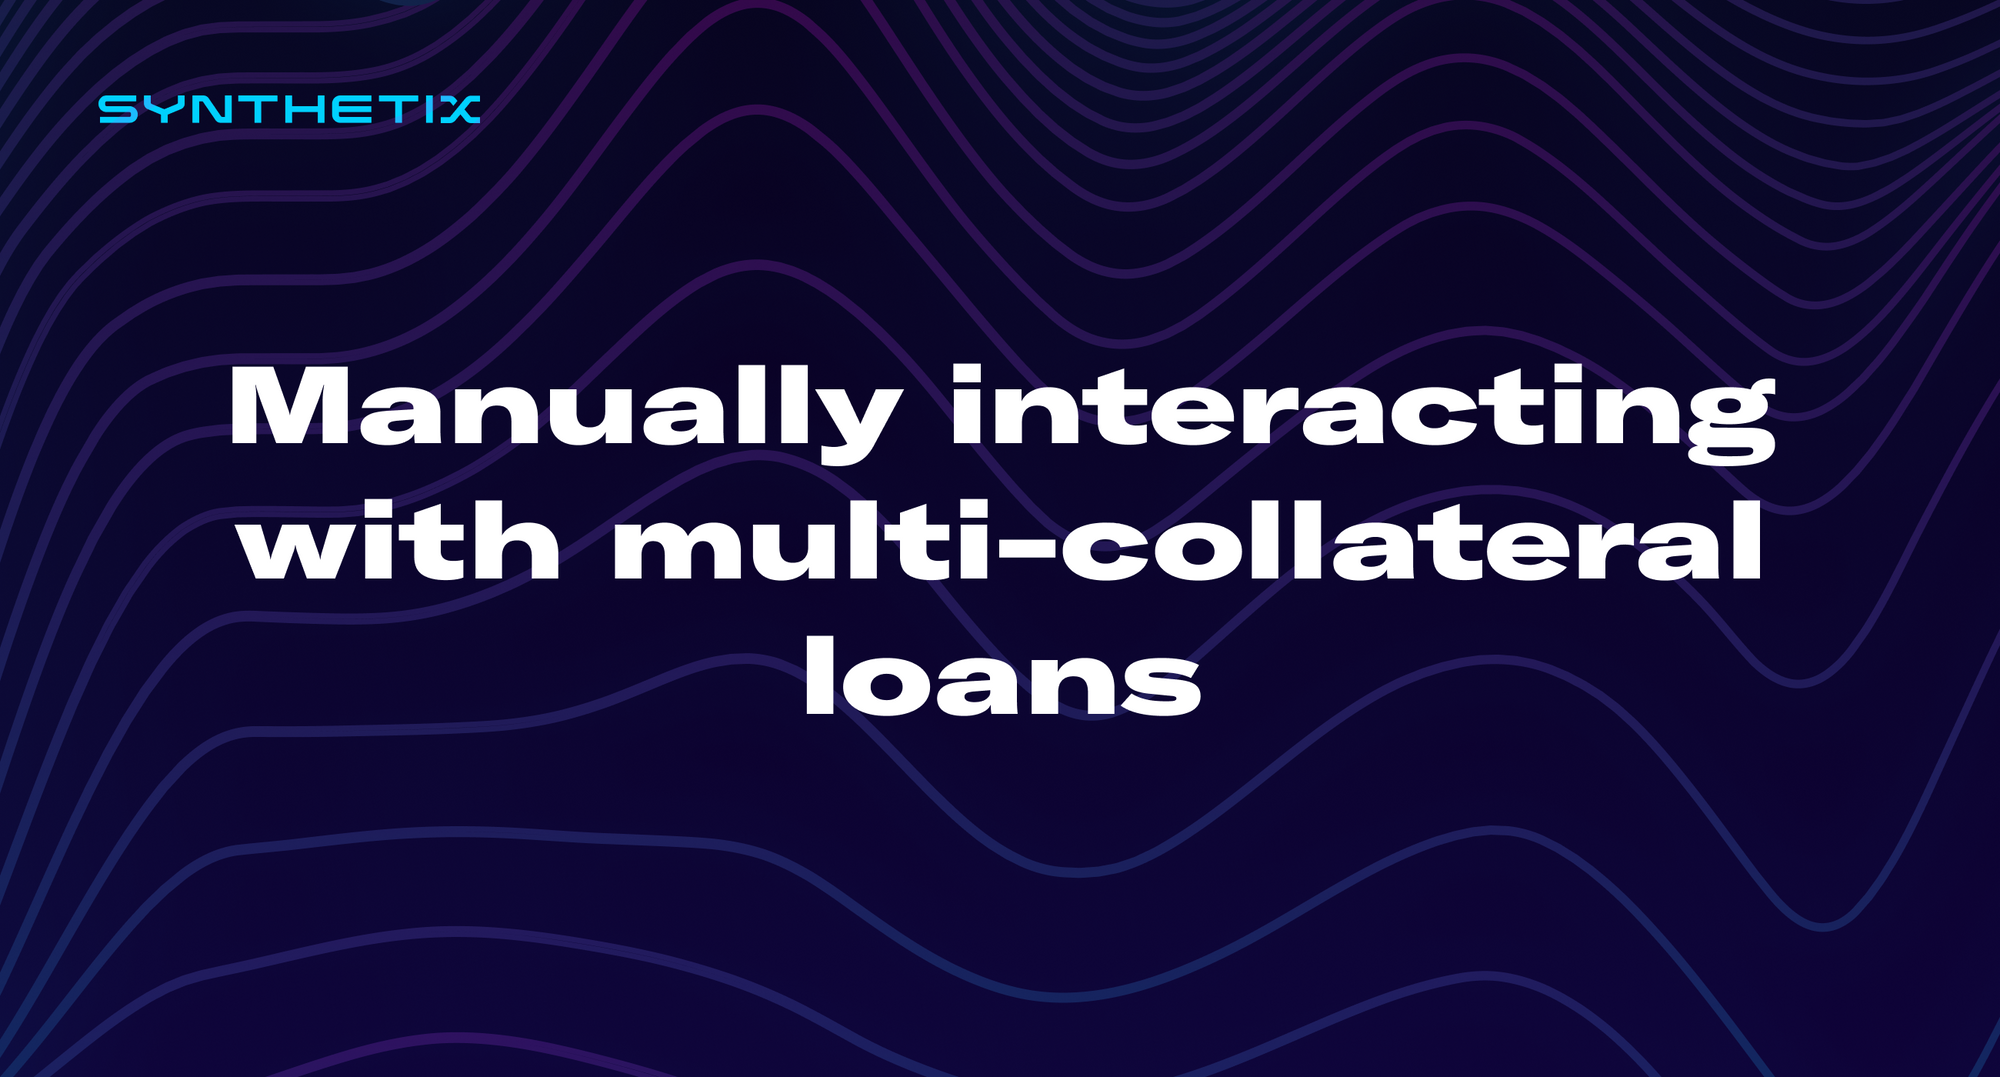 Manually interacting with multi-collateral loans